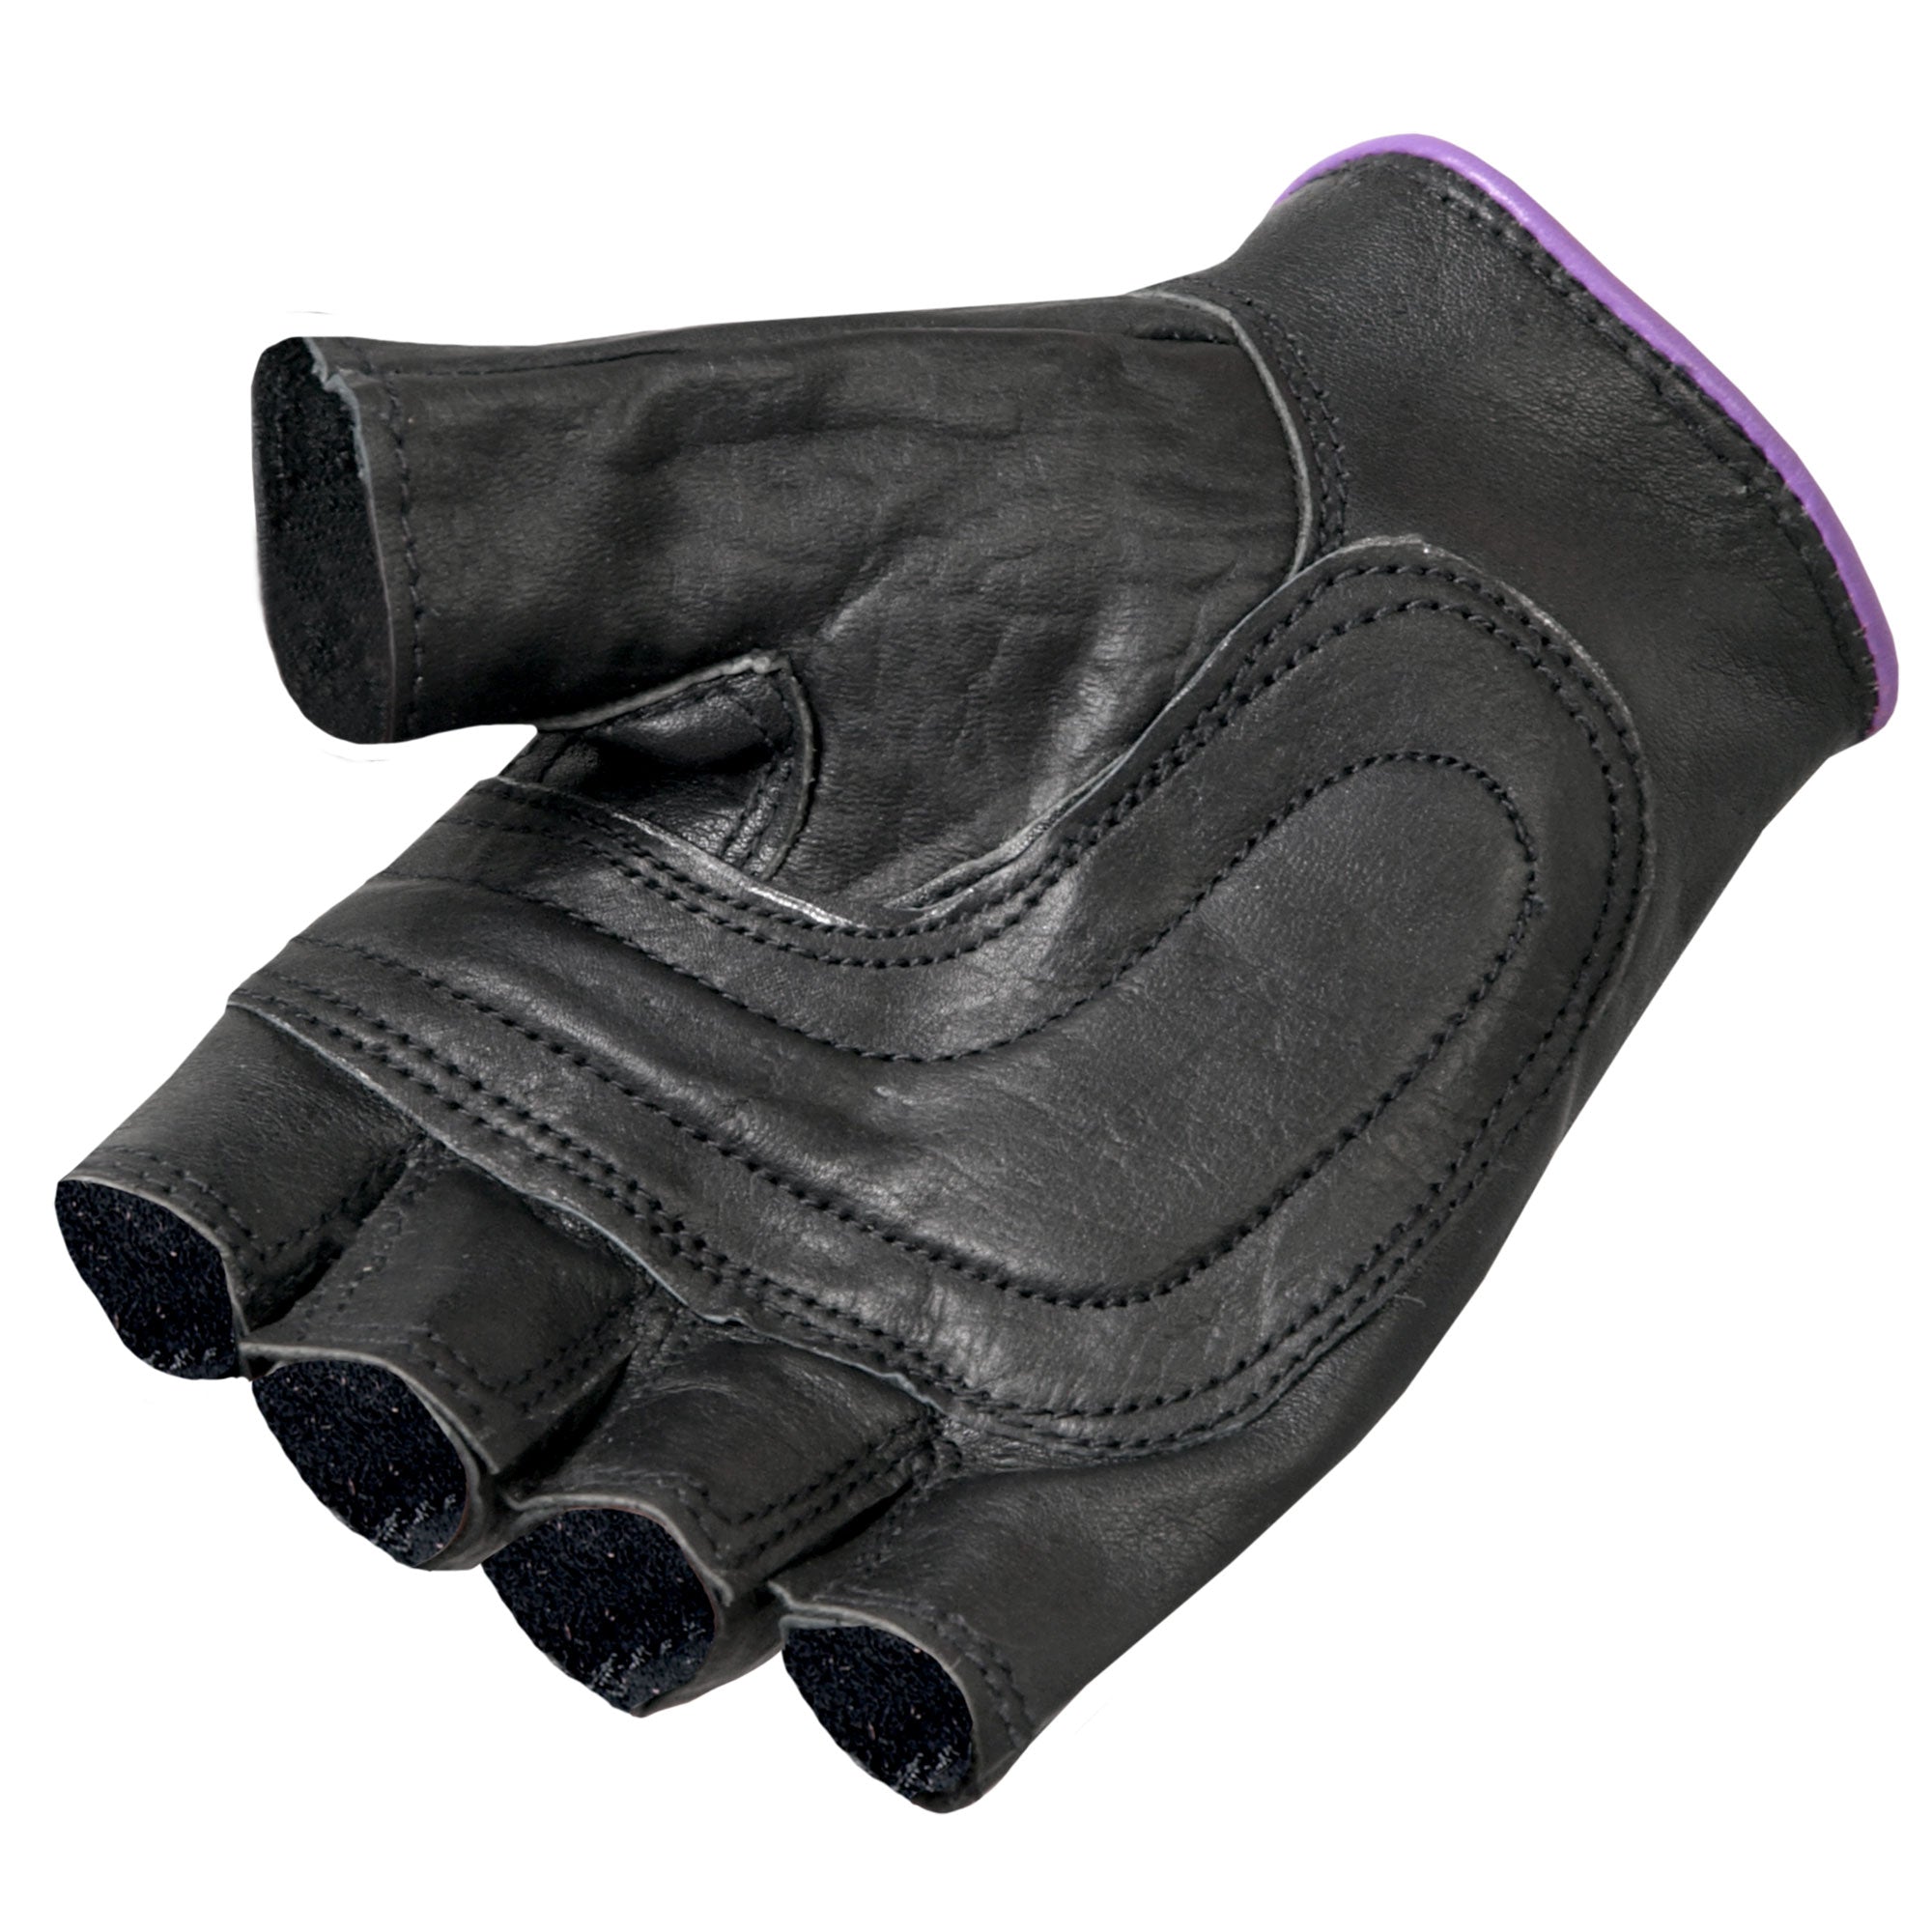 Hot Leathers GVL1005 Ladies Purple Piping Fingerless Gloves